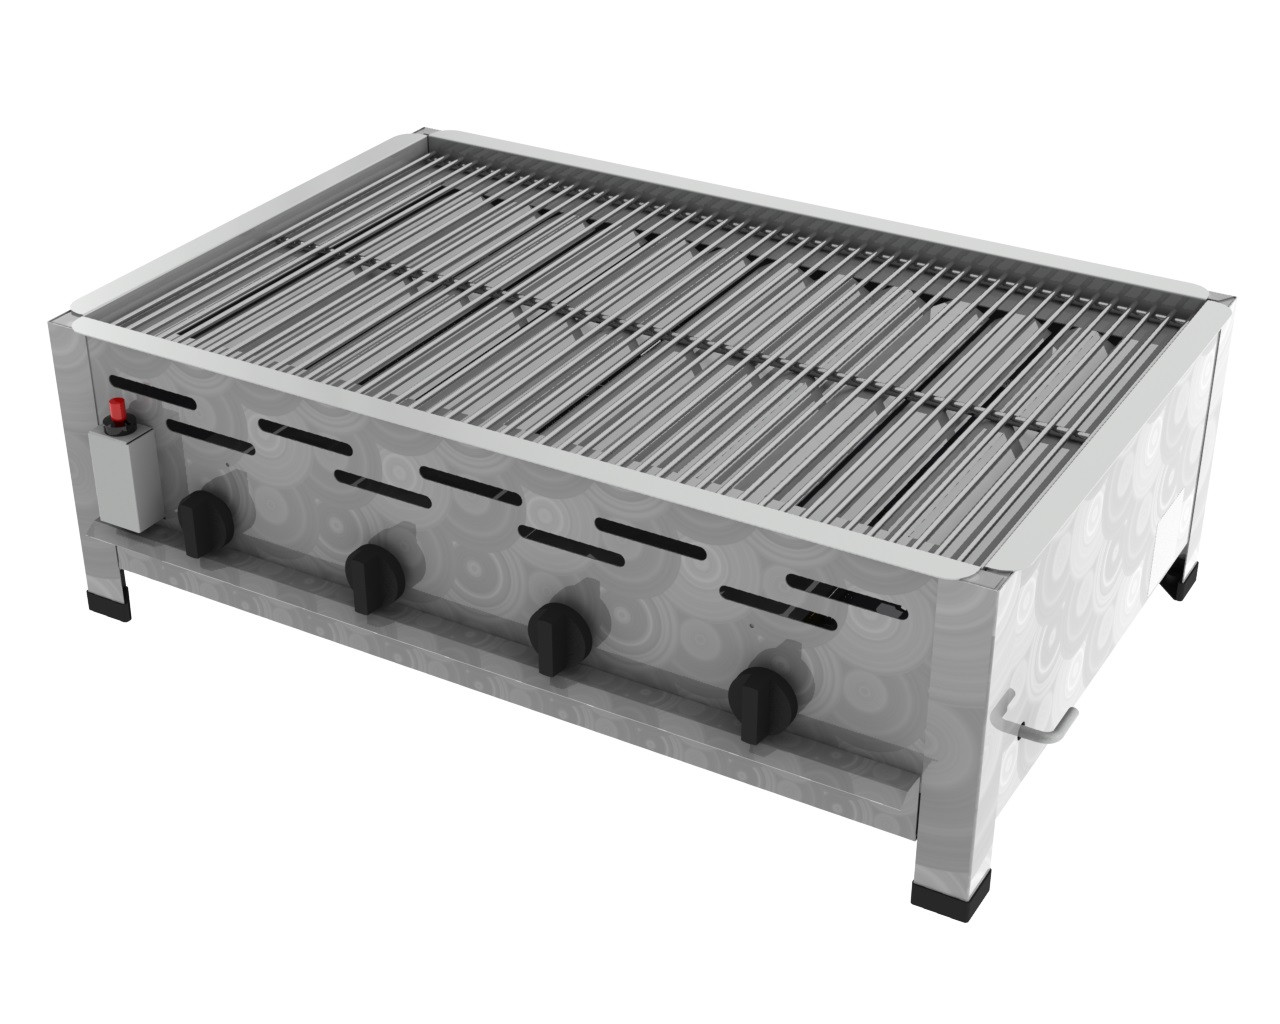 3-flammiger Gasgrill K+F Lavasteingrill mit Propangas Made in Germany 